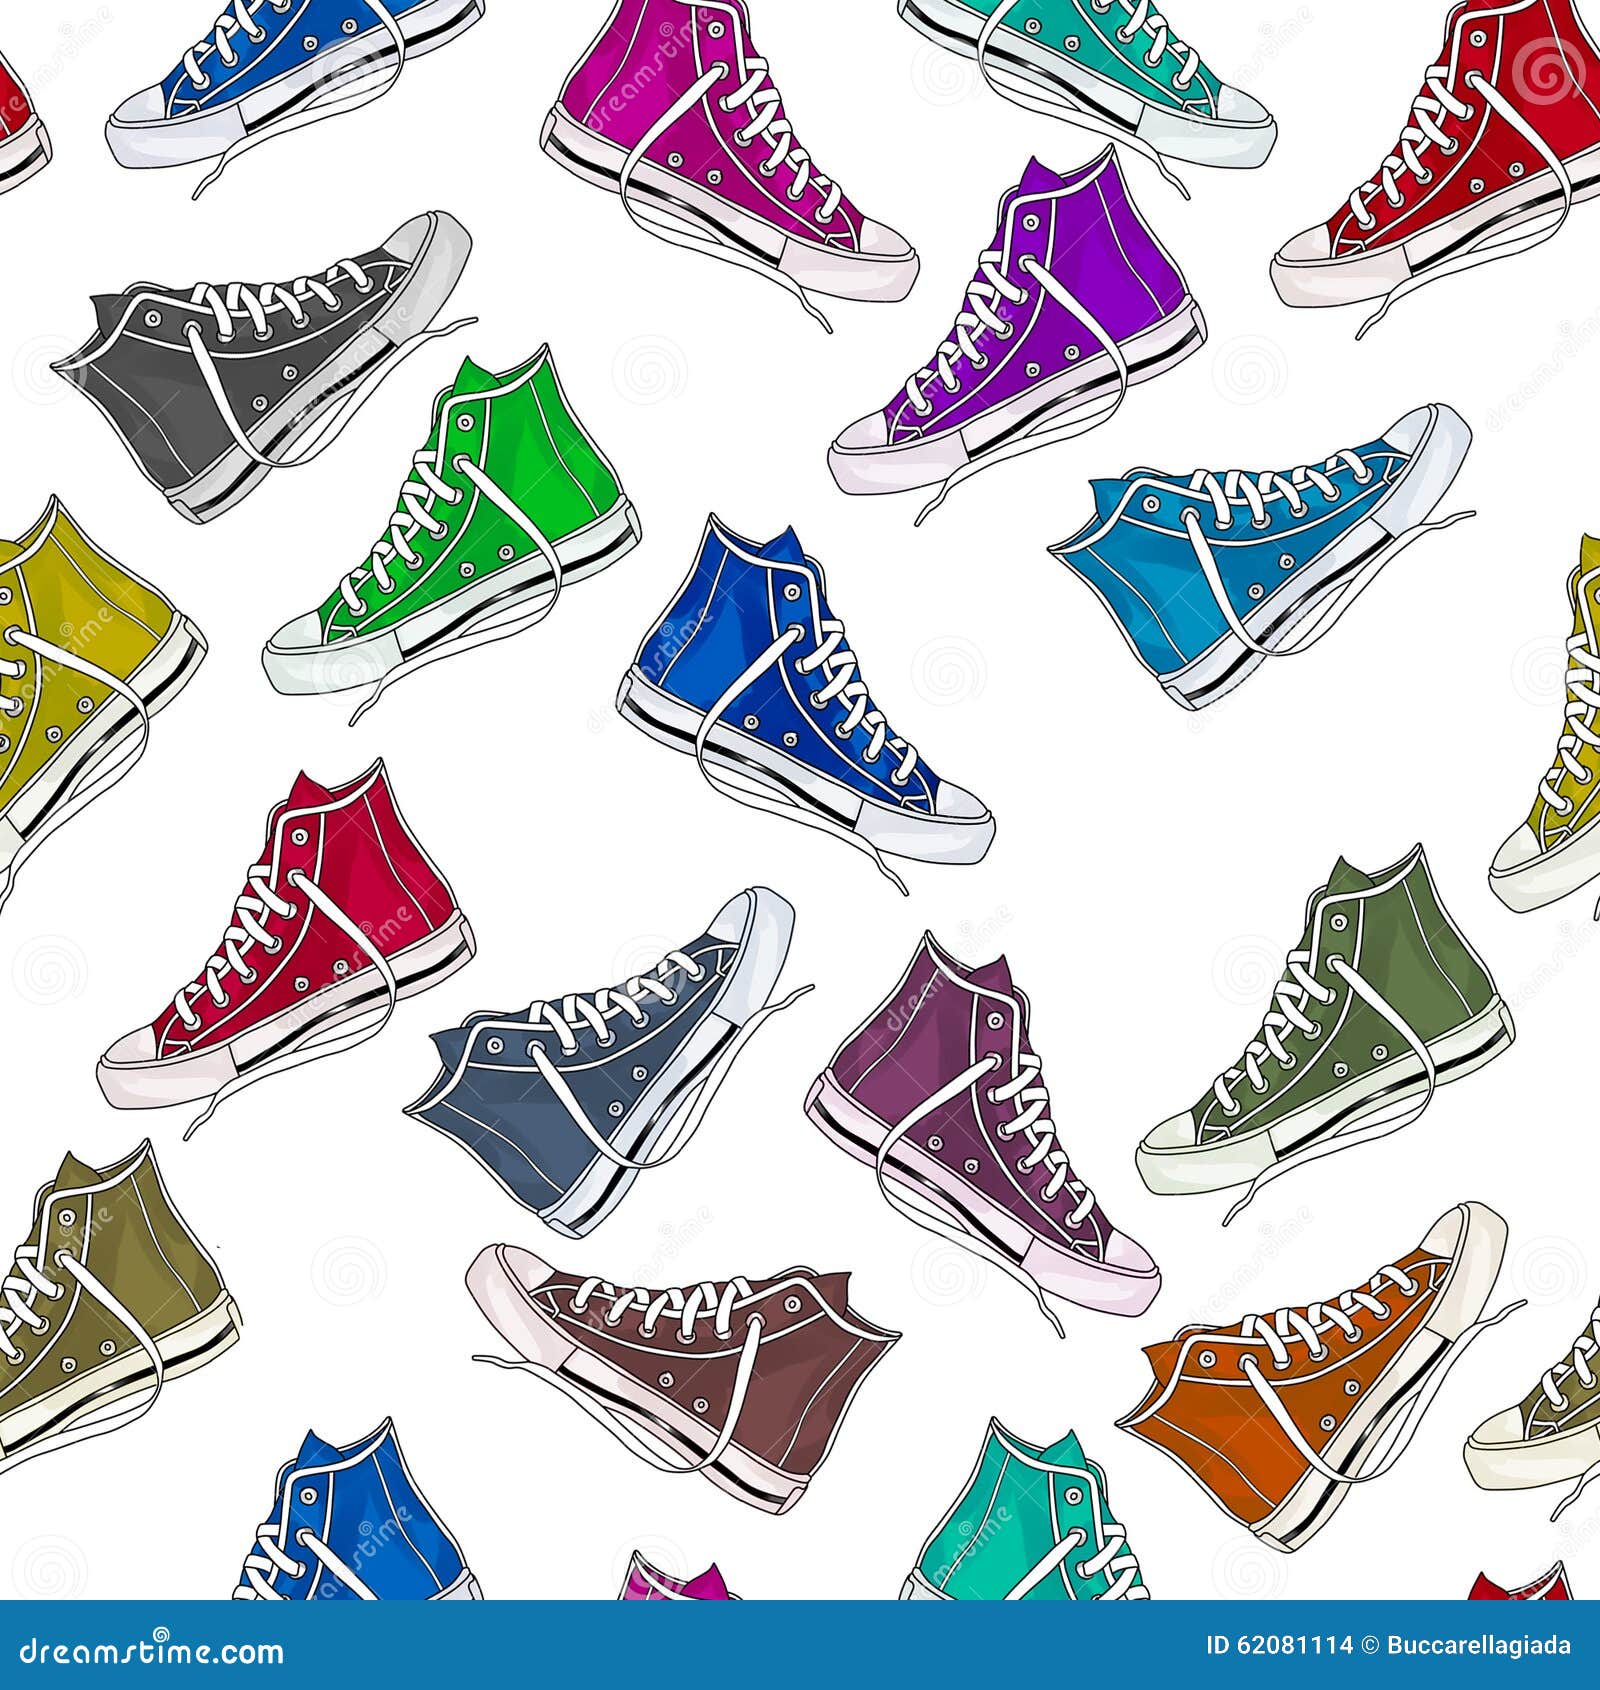 seamless pattern - all over pattern of colorful sneakers